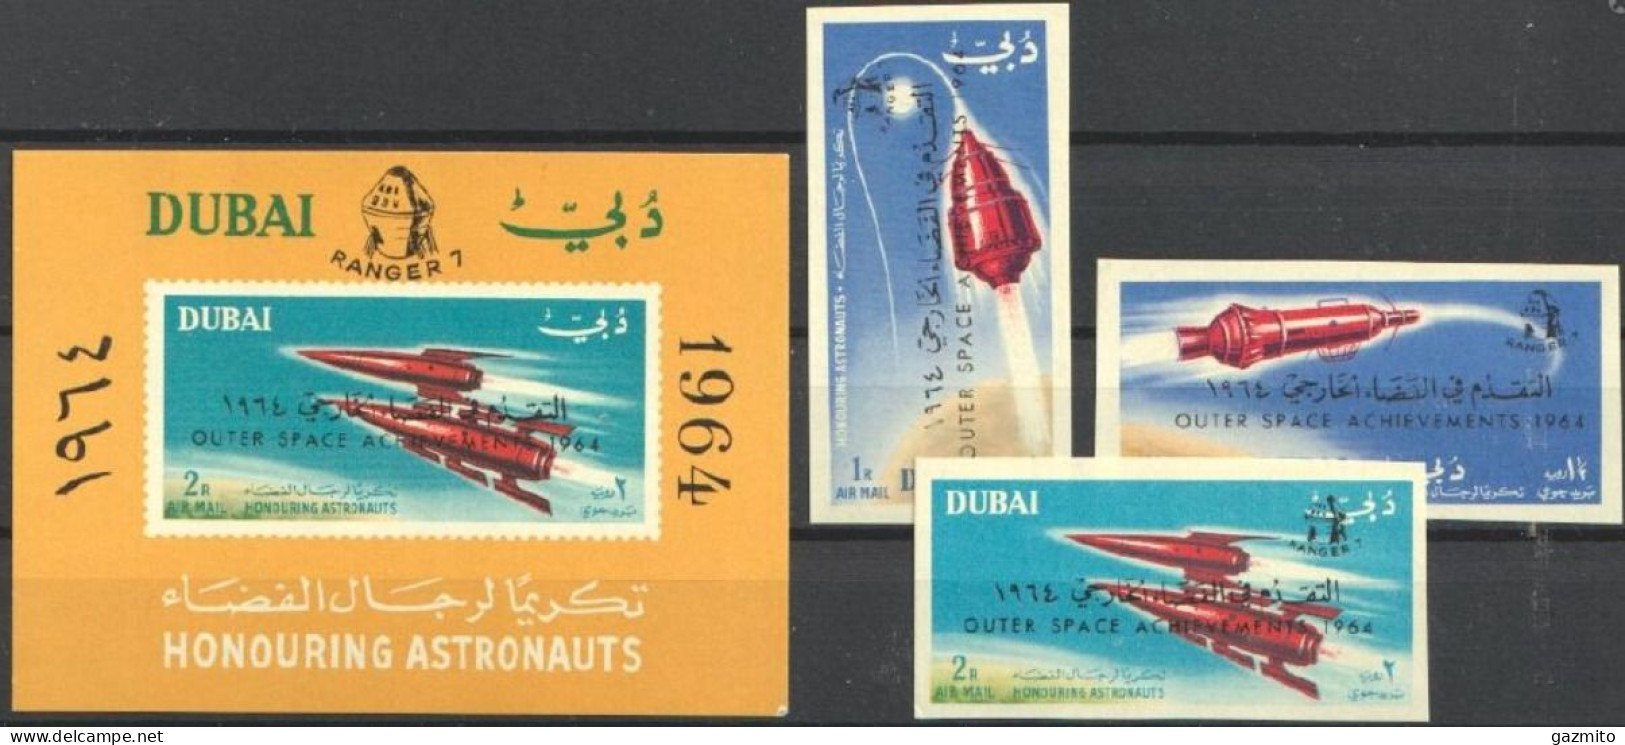 Dubai 1964, Space, Overp. Outer Space Achievement 1964, 3val+BF IMPERFORATED - Asie